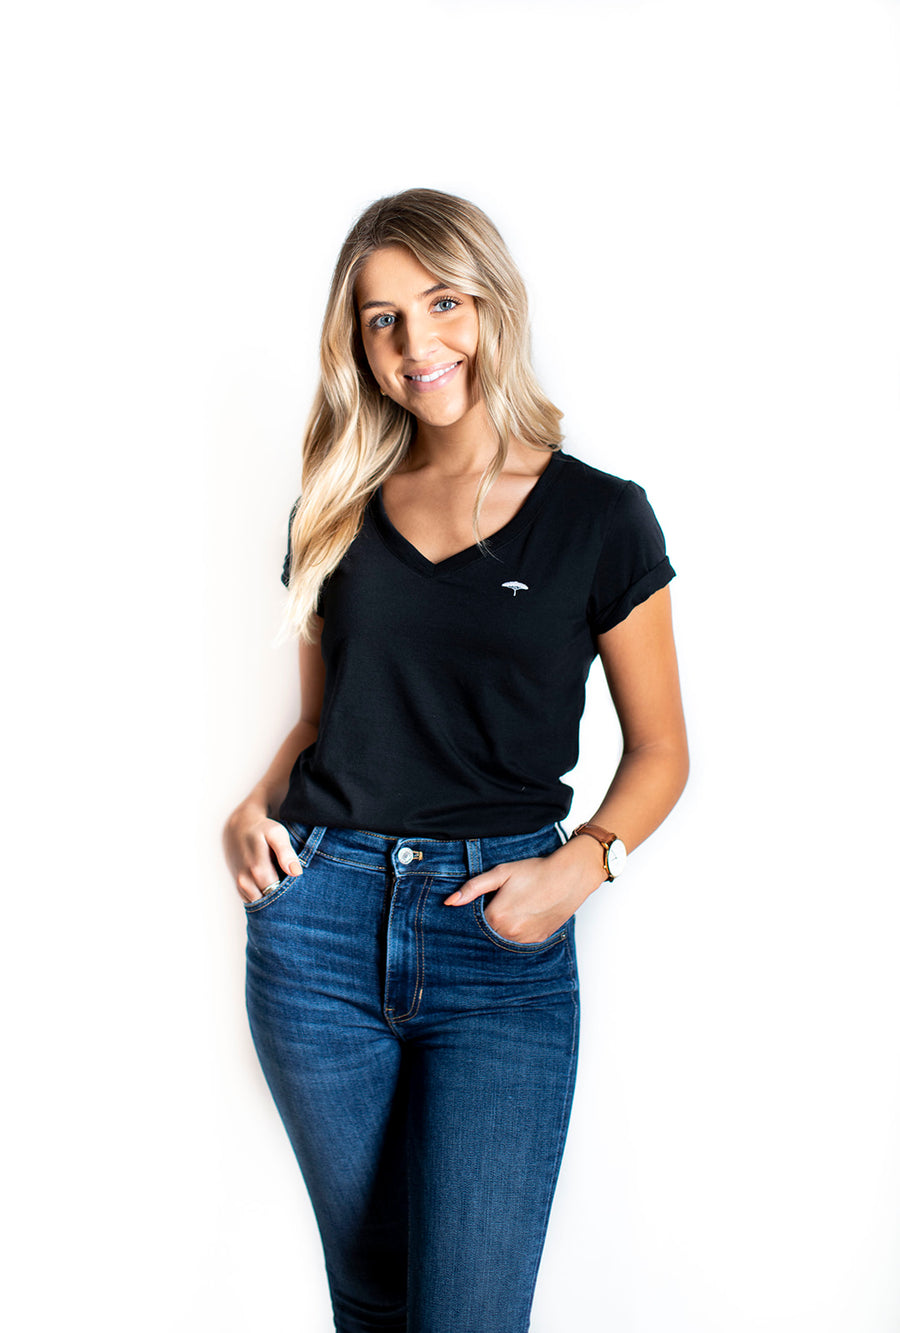 Women's ethically made short sleeve black t-shirt with small Ungalli logo